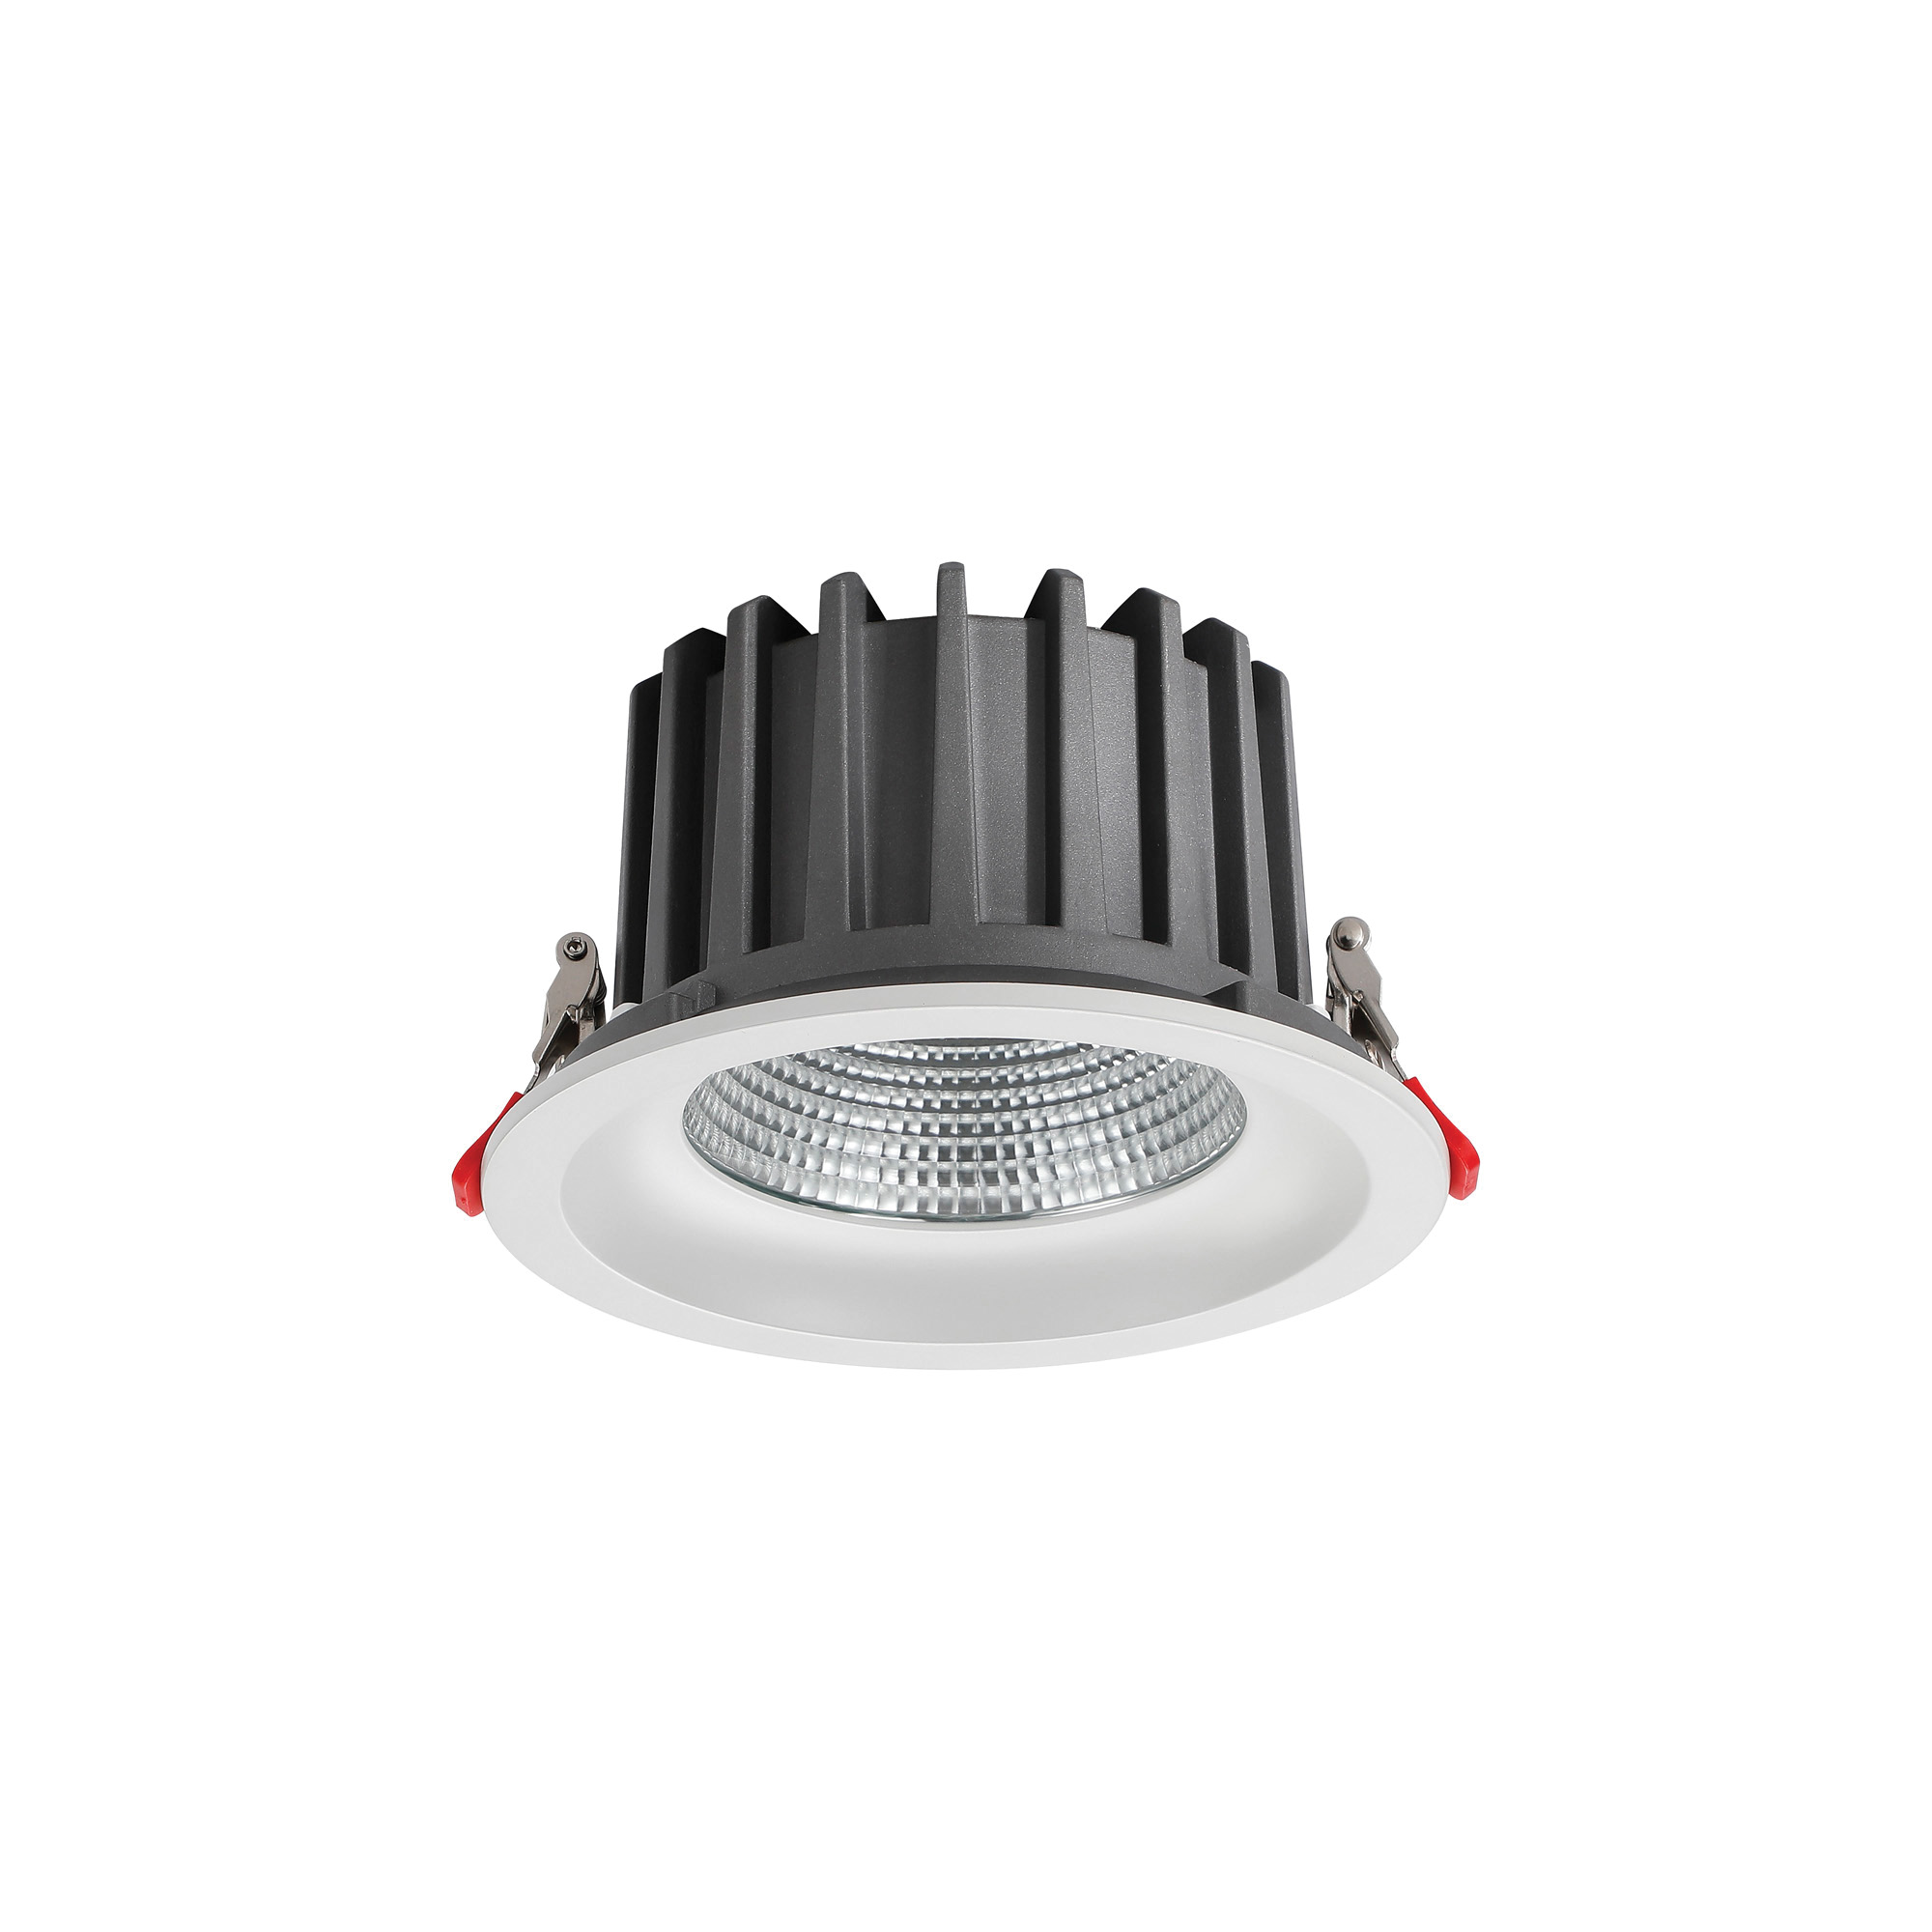 DL200062  Bionic 30; 30W; 700mA; White Deep Round Recessed Downlight; 2475lm ;Cut Out 155mm; 42° ; 4000K; IP44; DRIVER INC.; 5yrs Warranty.